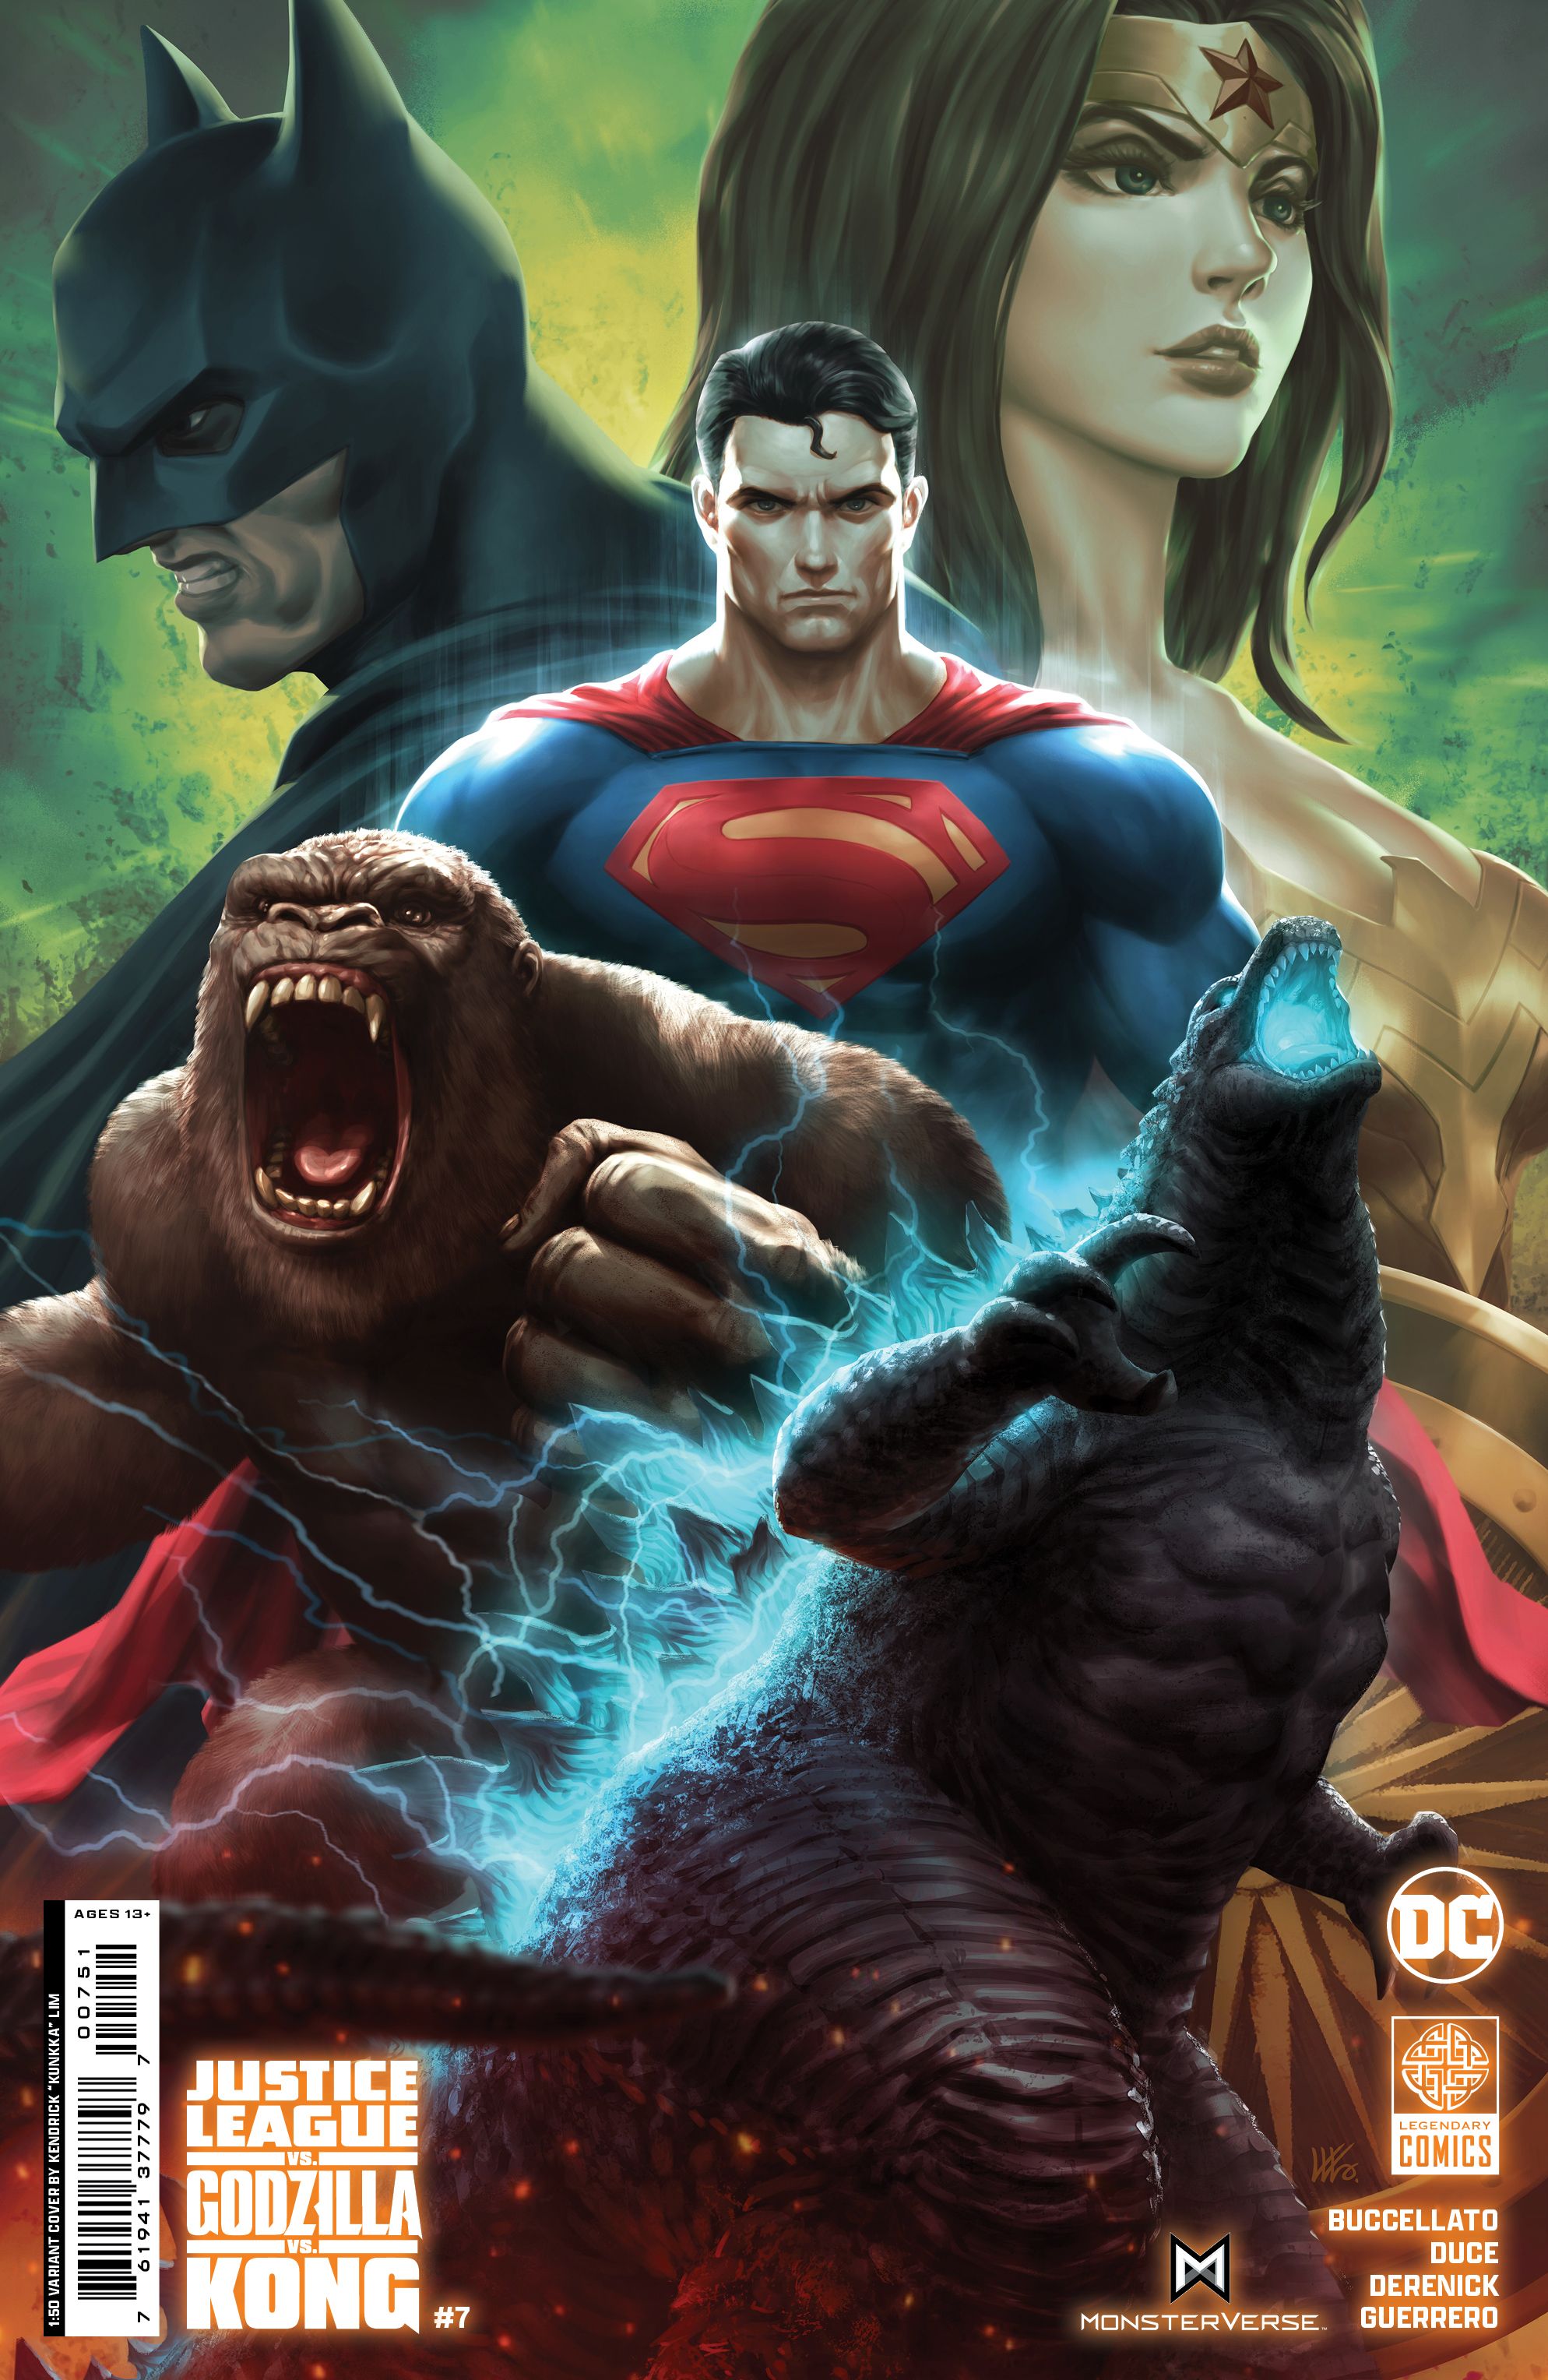 First Look: The Justice League Joins Godzilla and Kong in Series Finale